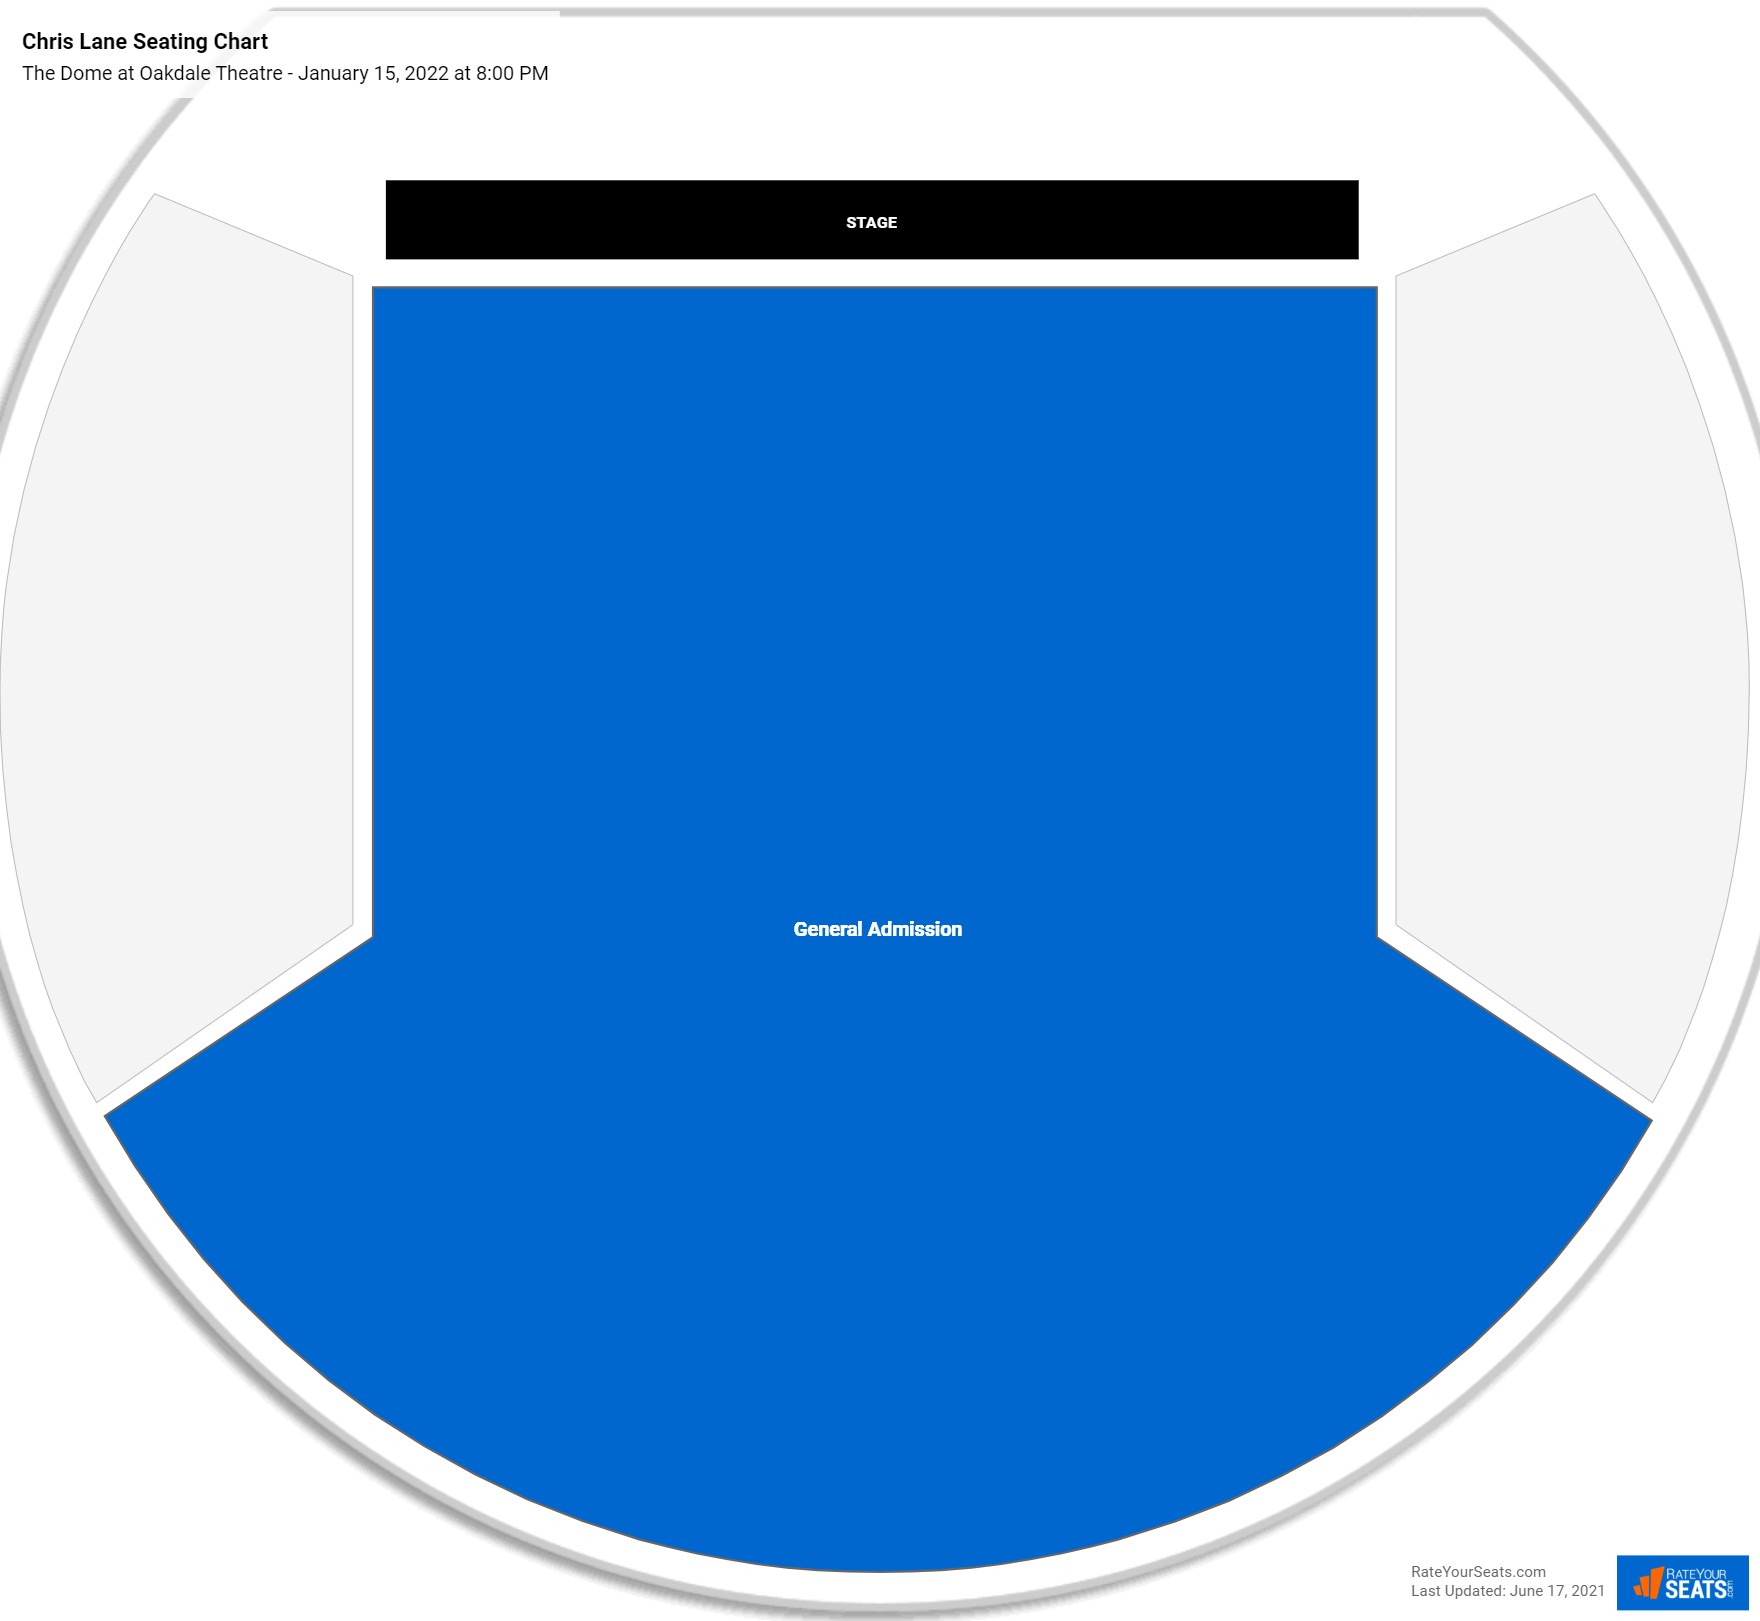 The Dome at Oakdale Theatre Seating Chart